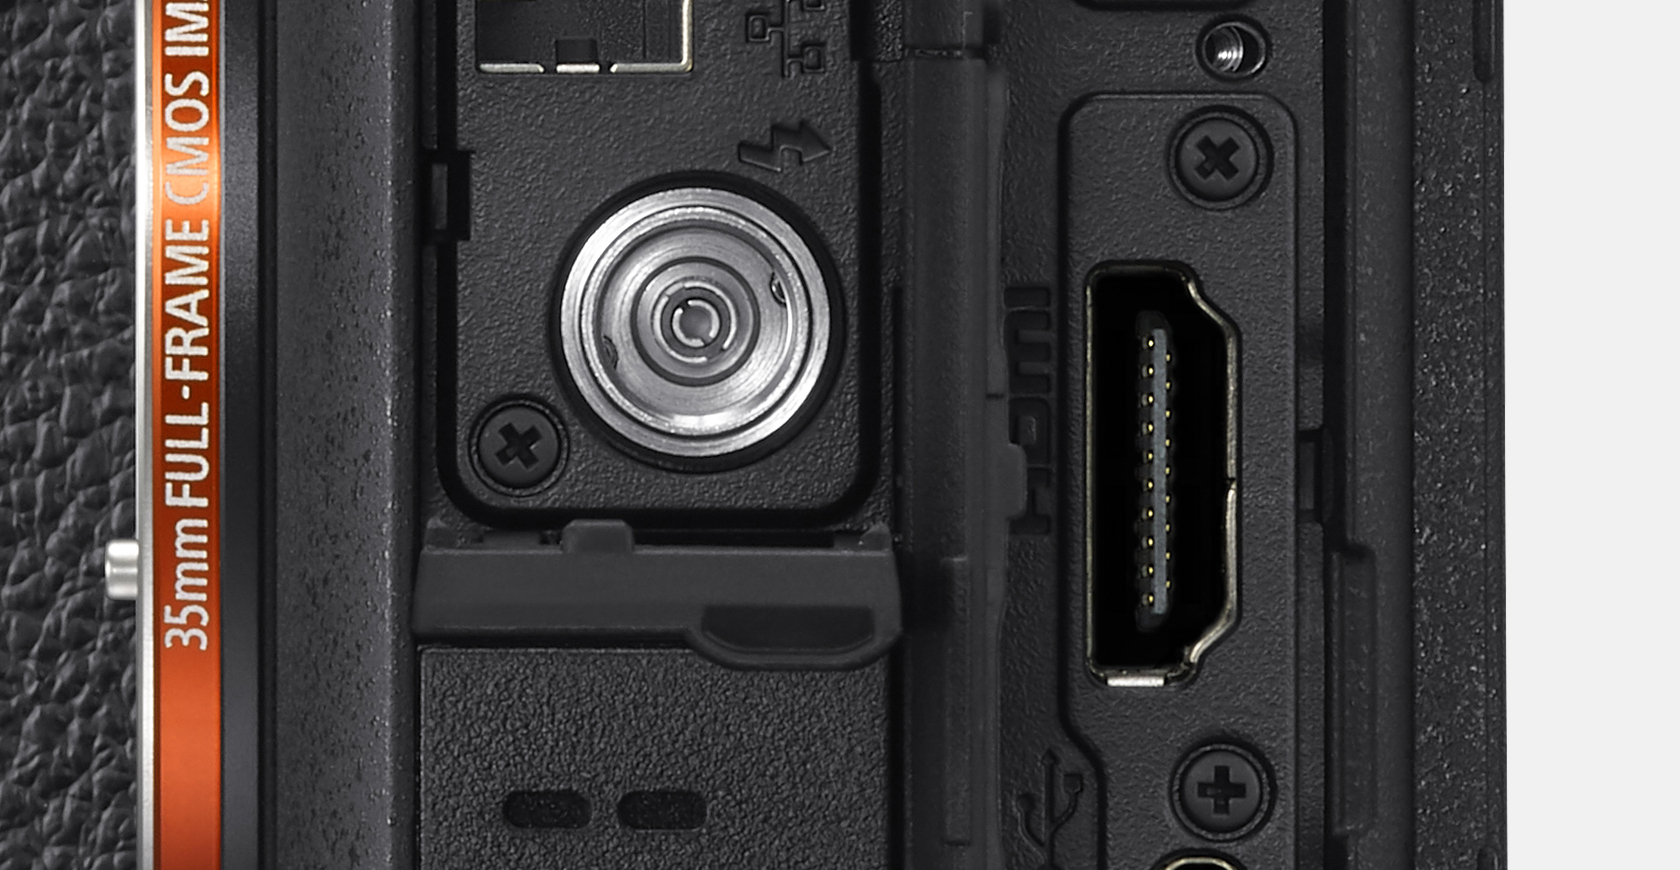 Camera front and rear views showing HDMI and other connectors